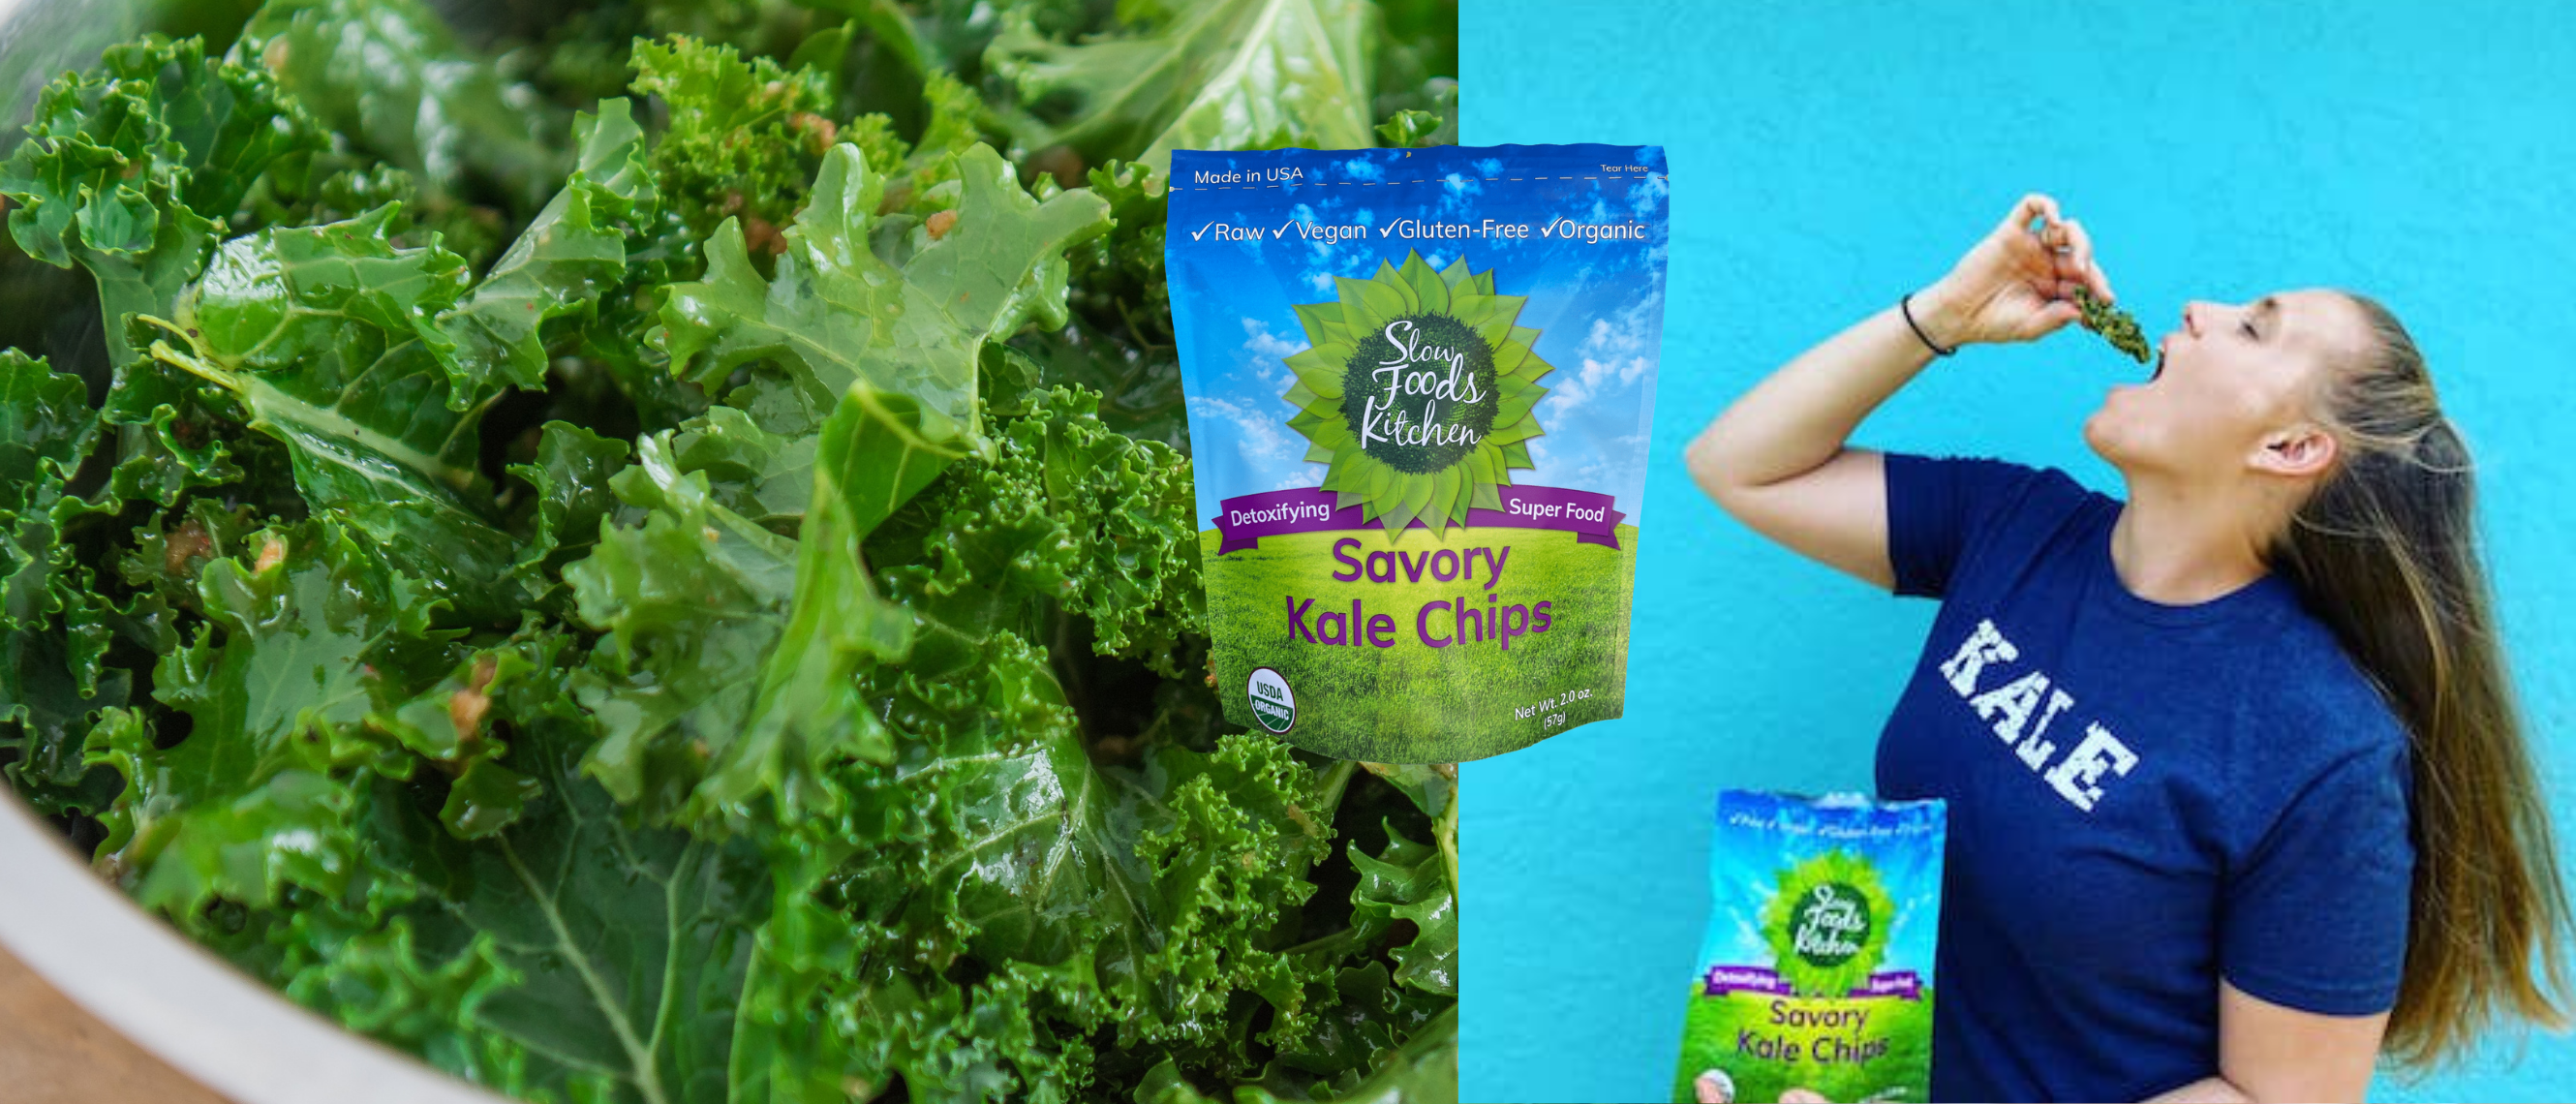 slow foods kitchen kale chips inside the Oh Goodie snack box